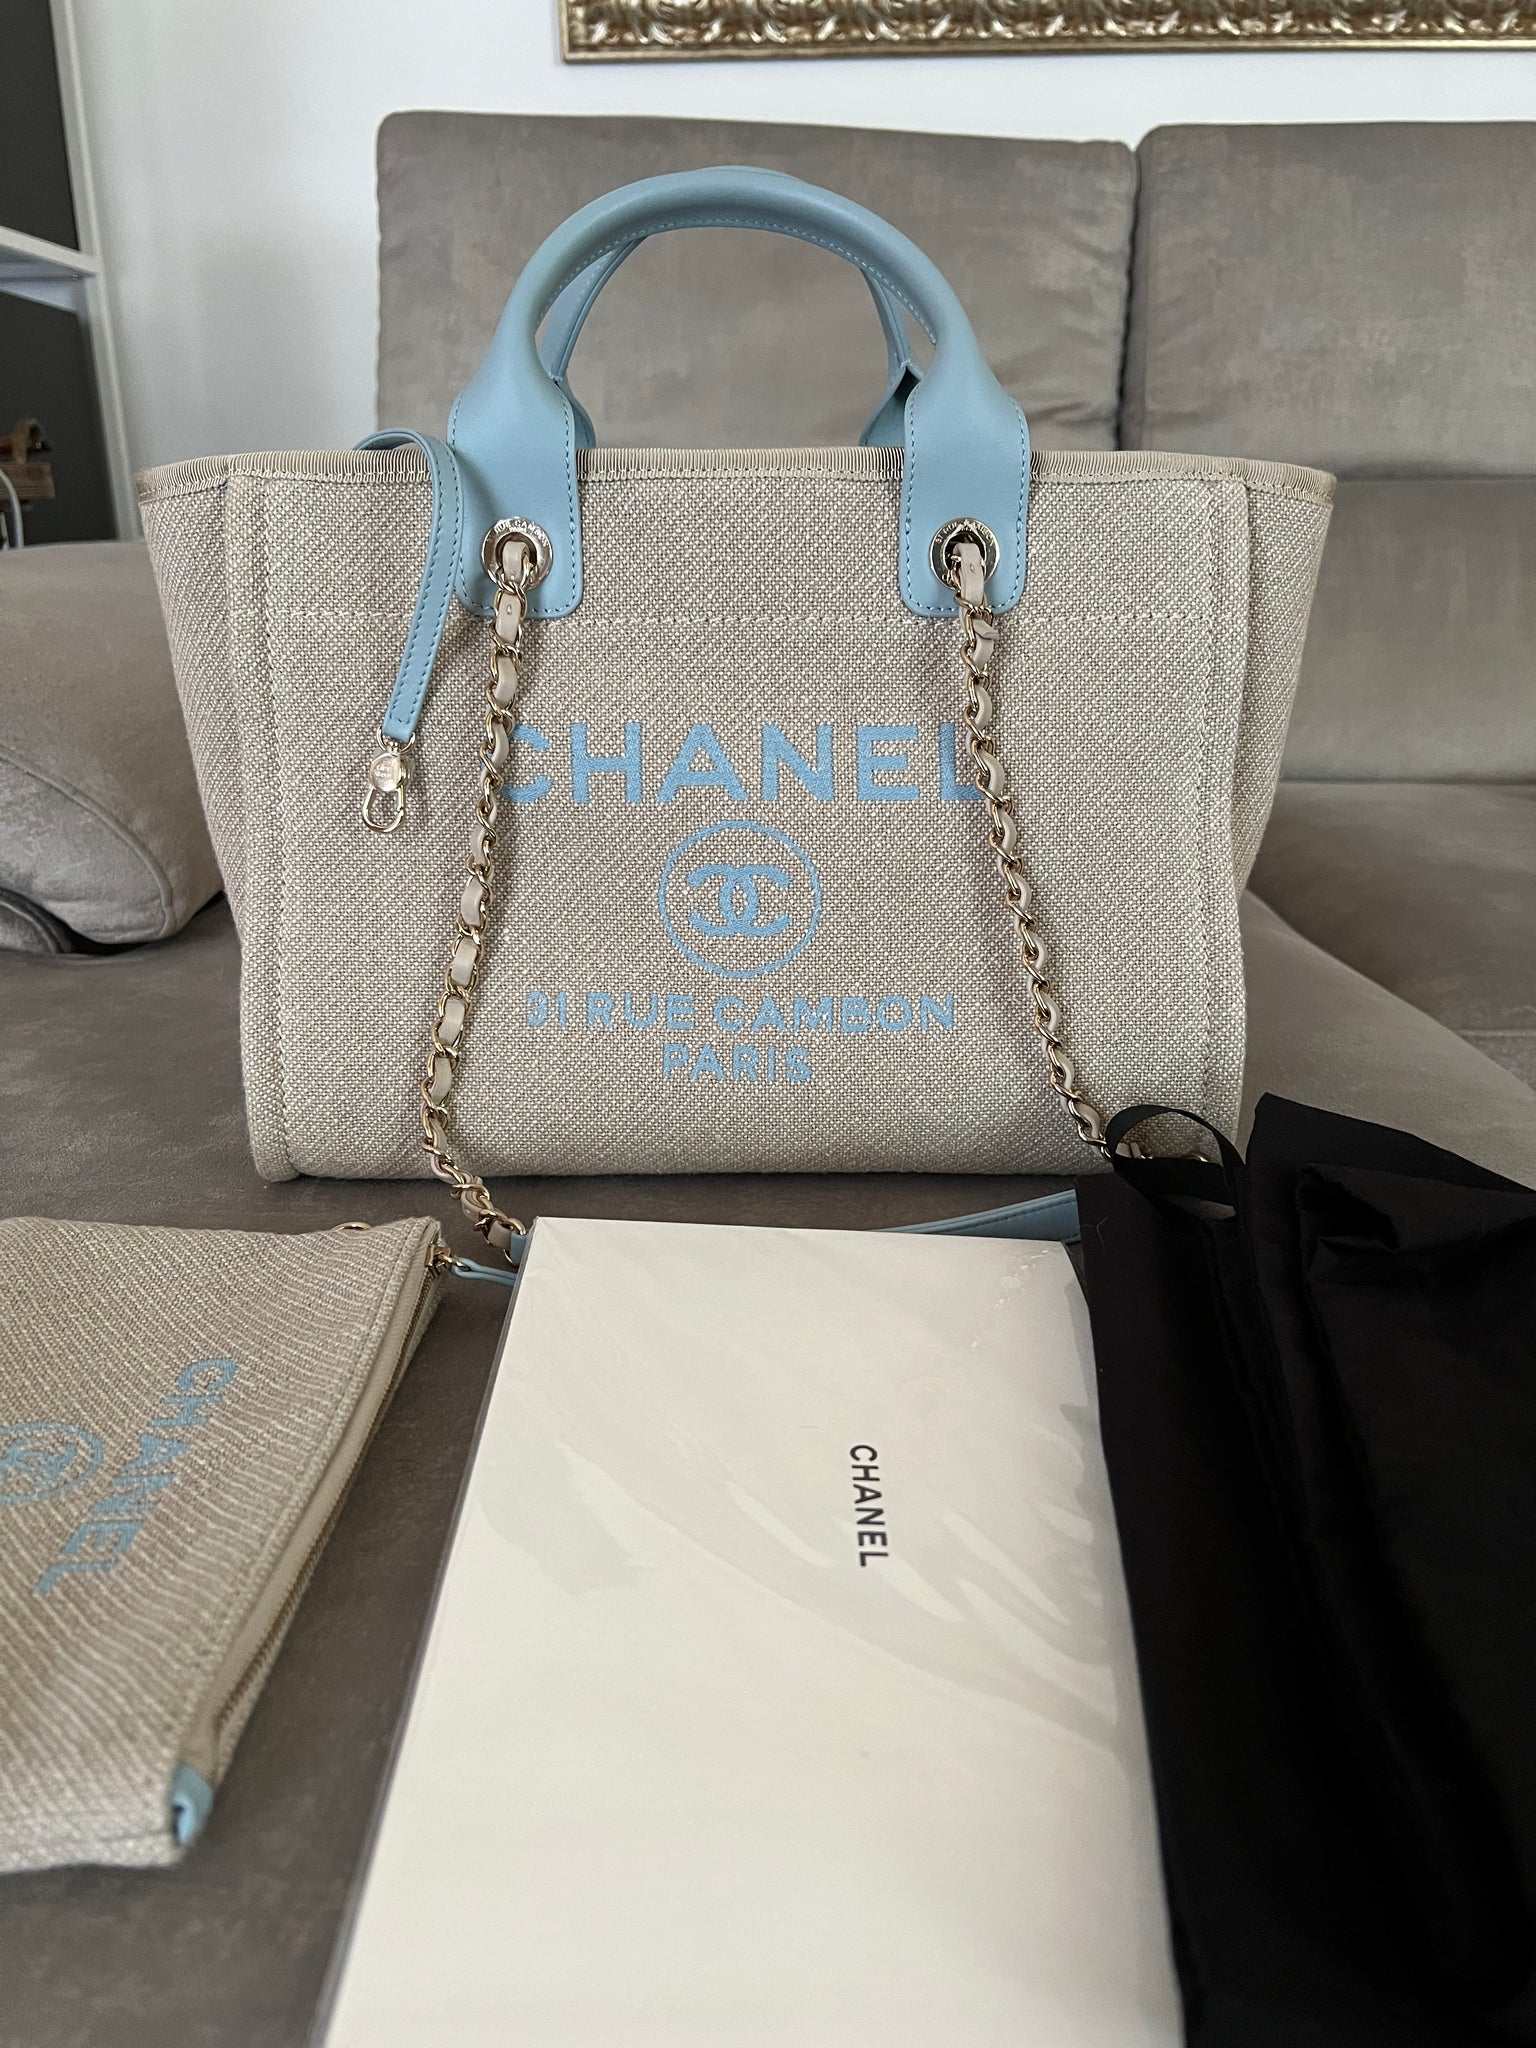 chanel deauville tote bags